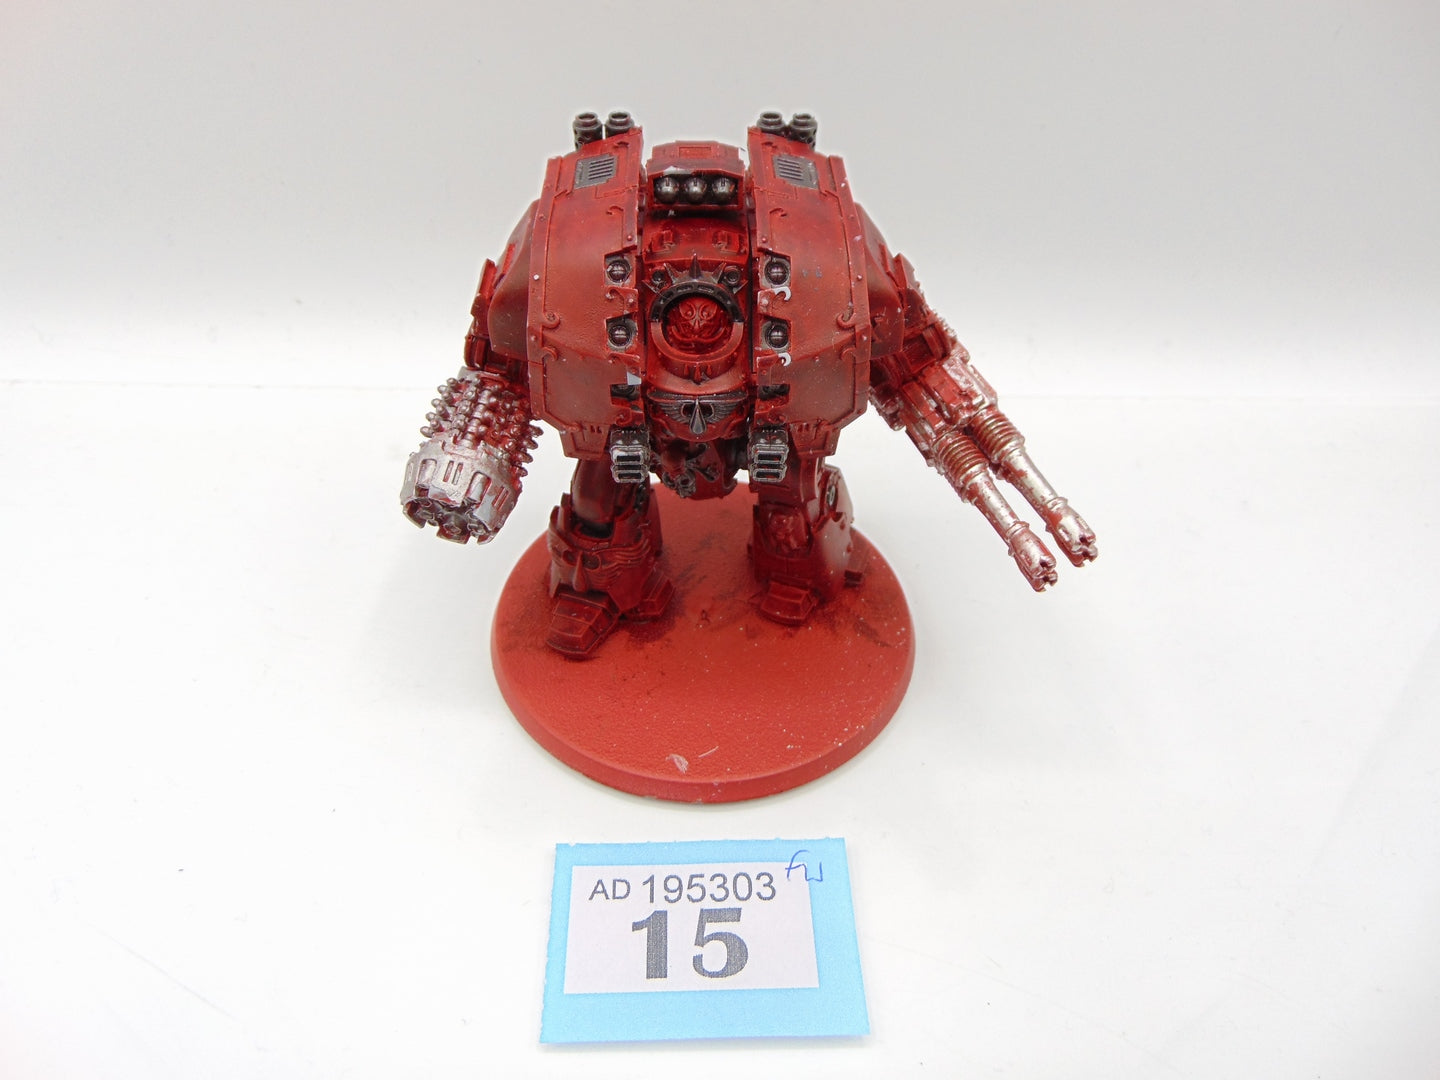 Ultramarine 30k 40k Leviathan Dreadnought With Storm Cannon Painted -   New Zealand